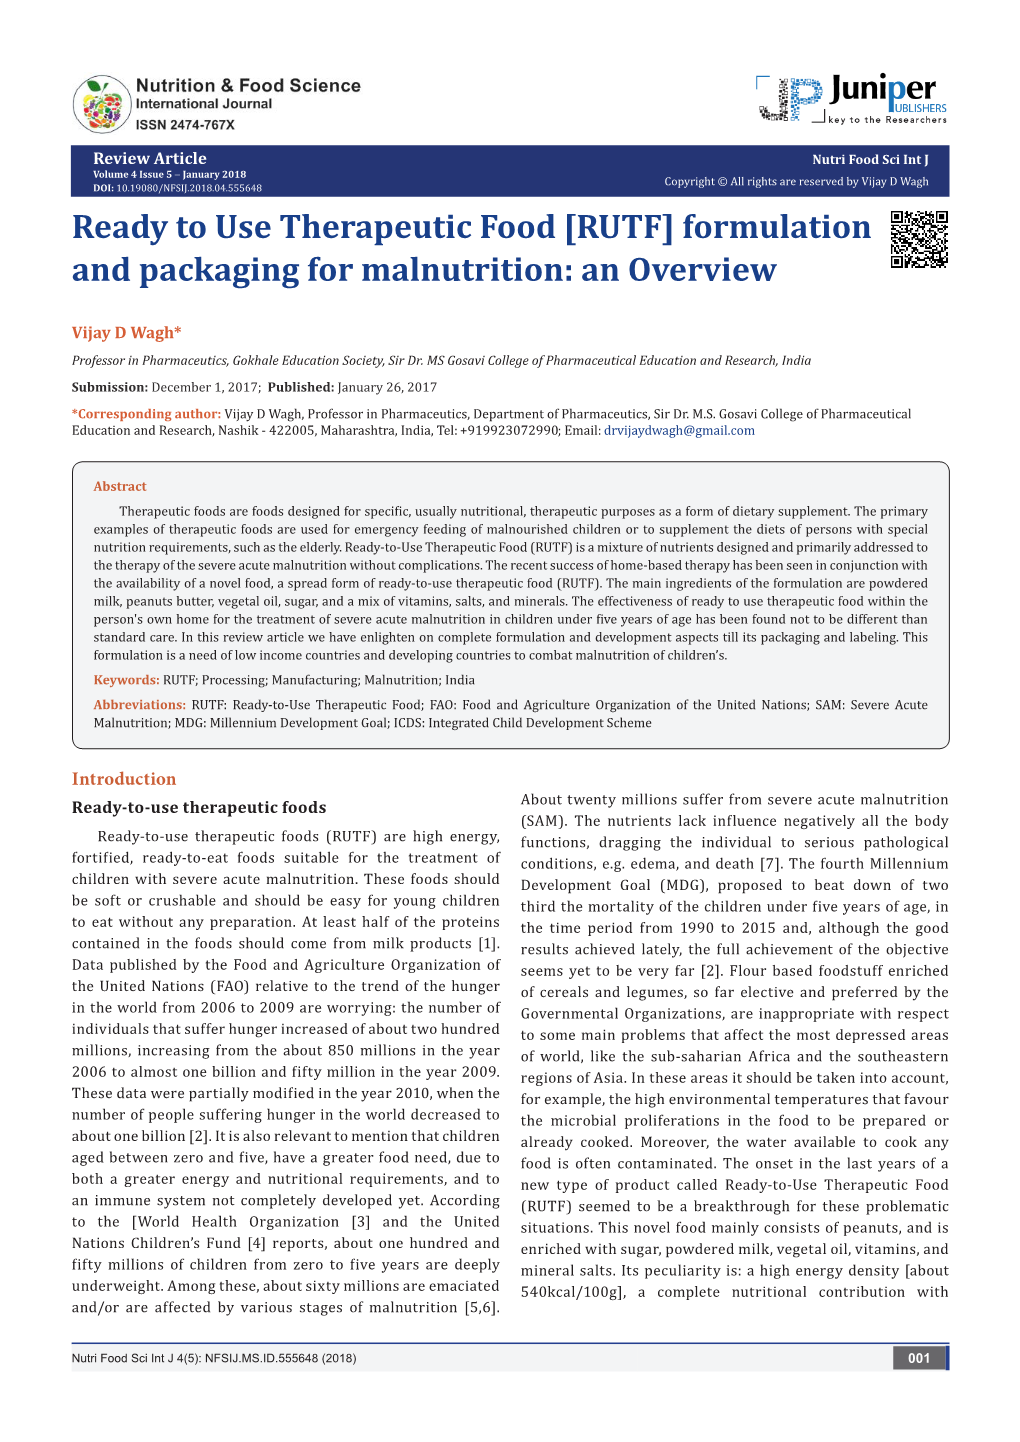 RUTF] Formulation and Packaging for Malnutrition: an Overview